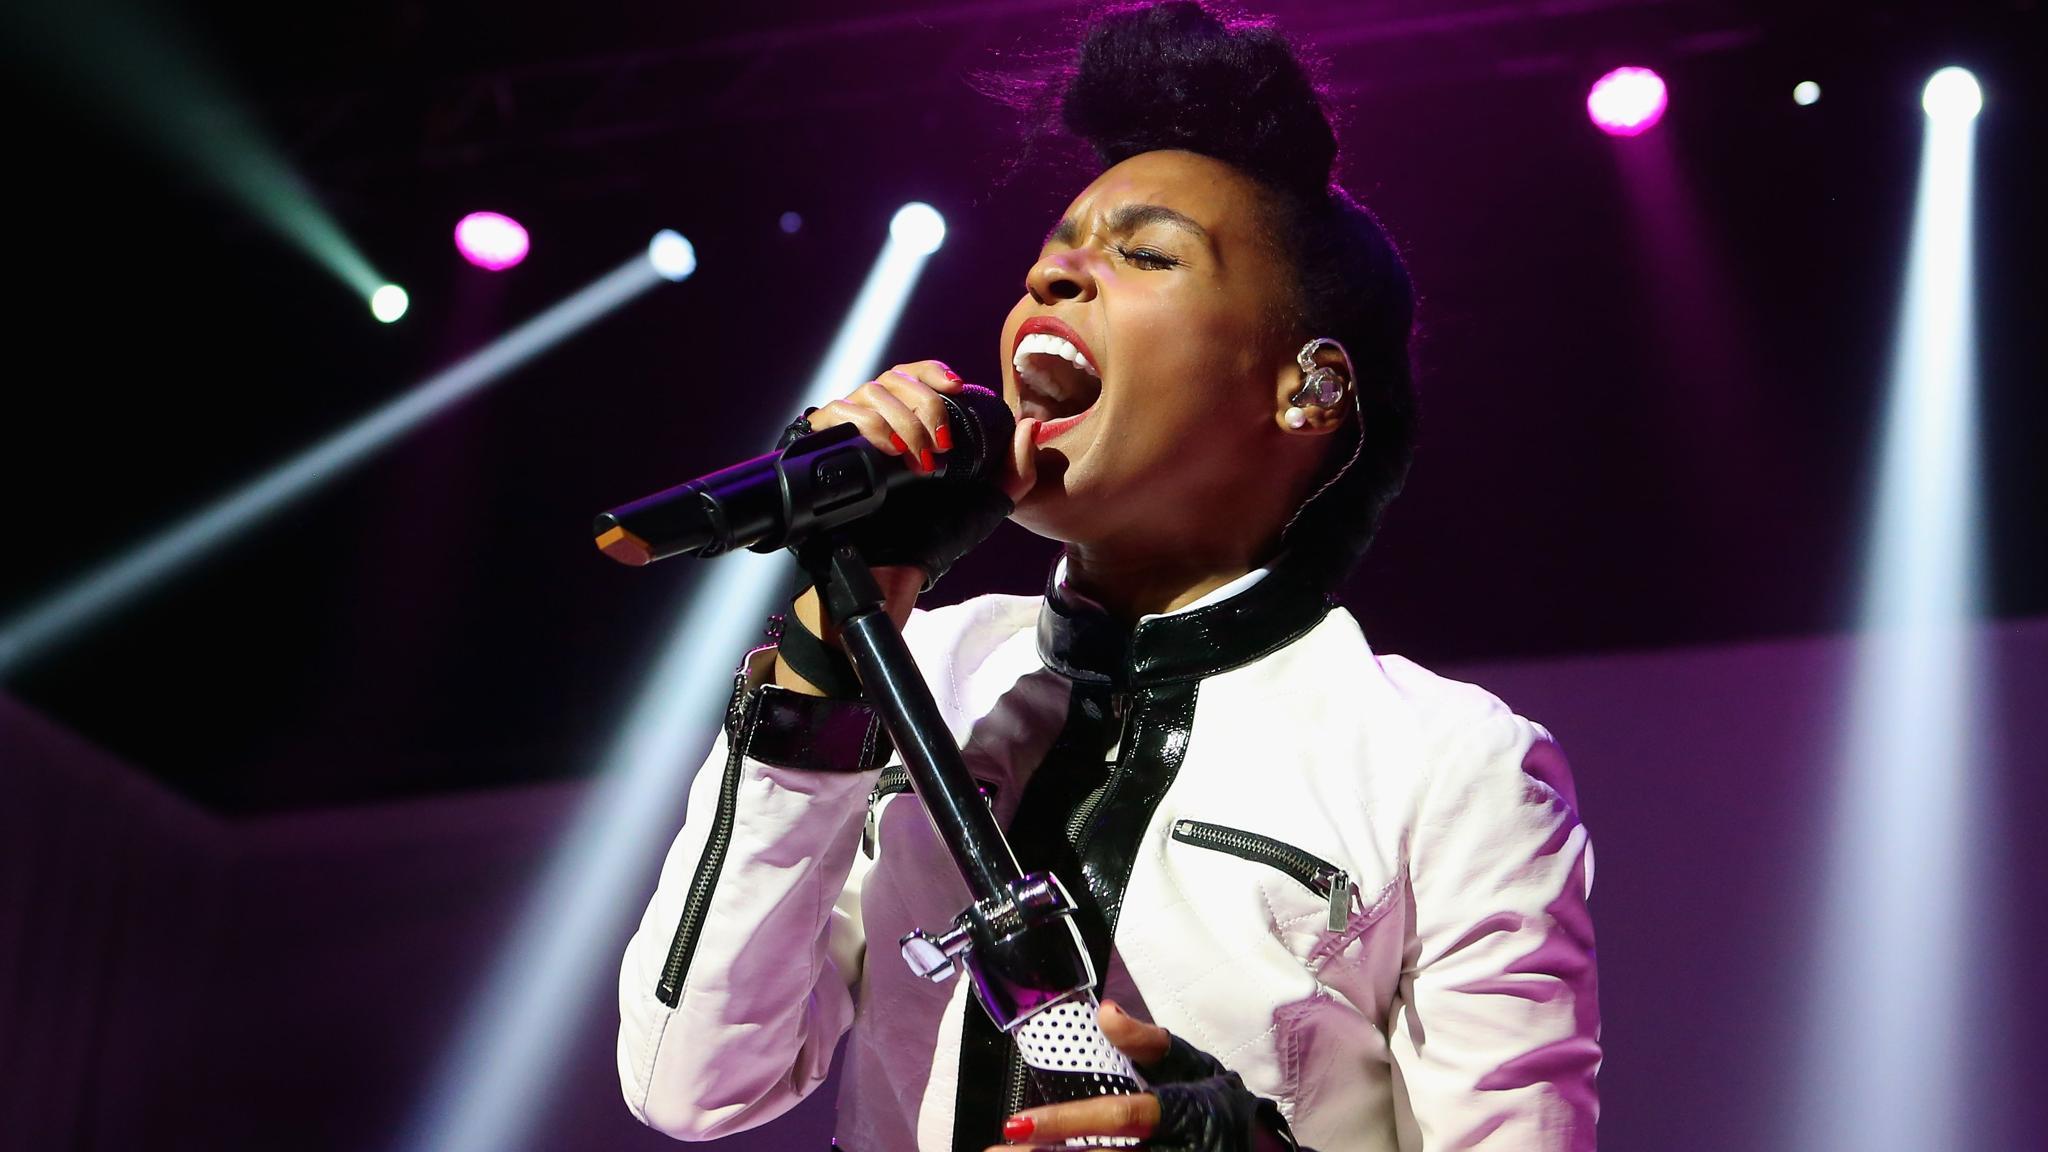 Janelle Monae performs live on stage at 02 Academy Brixton on May 9, 2014 in London, England.